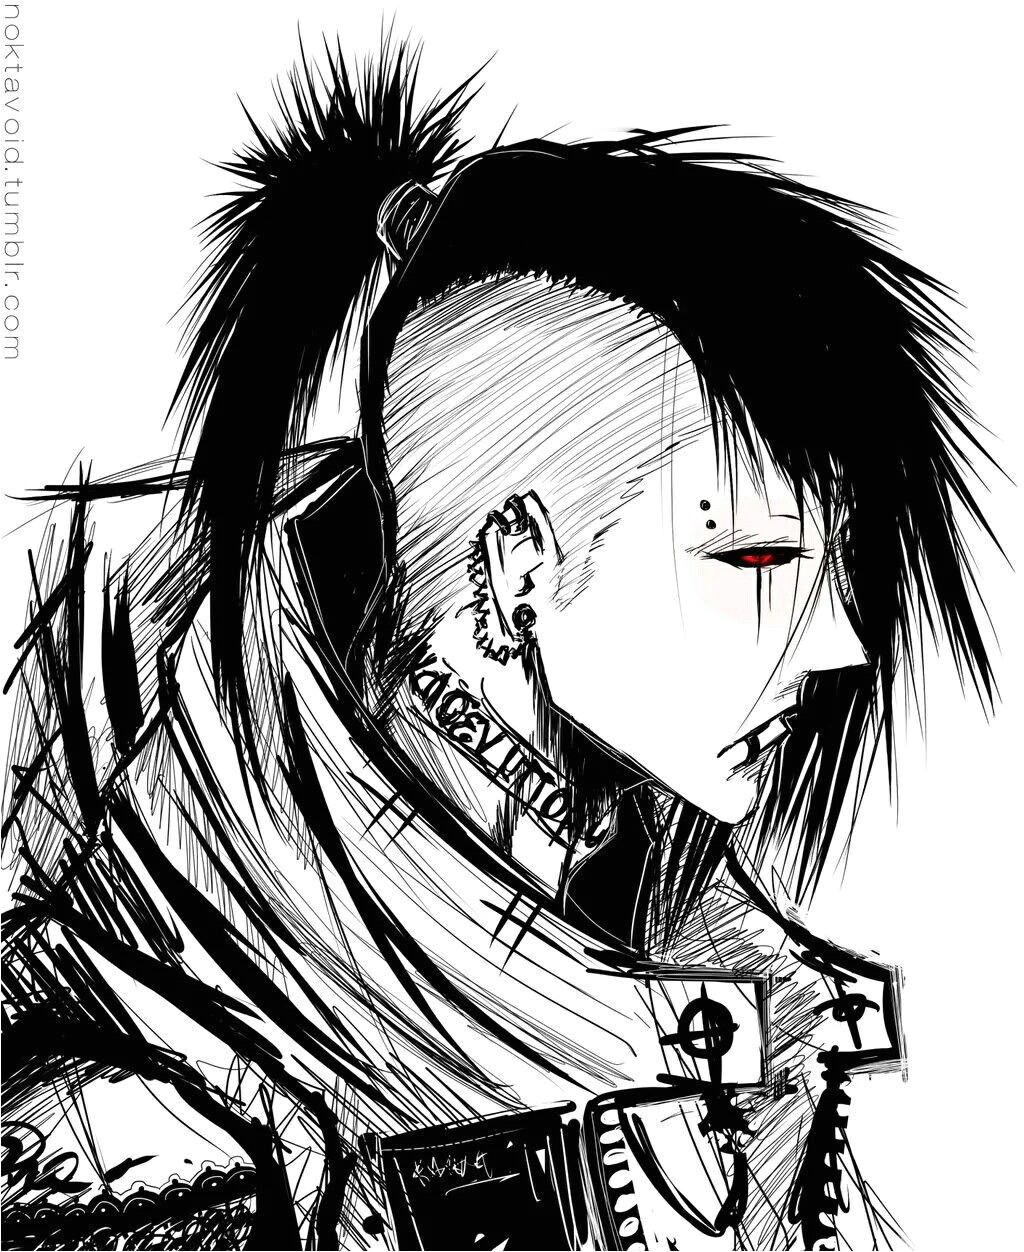 Uta with a more punk looking hairstyle